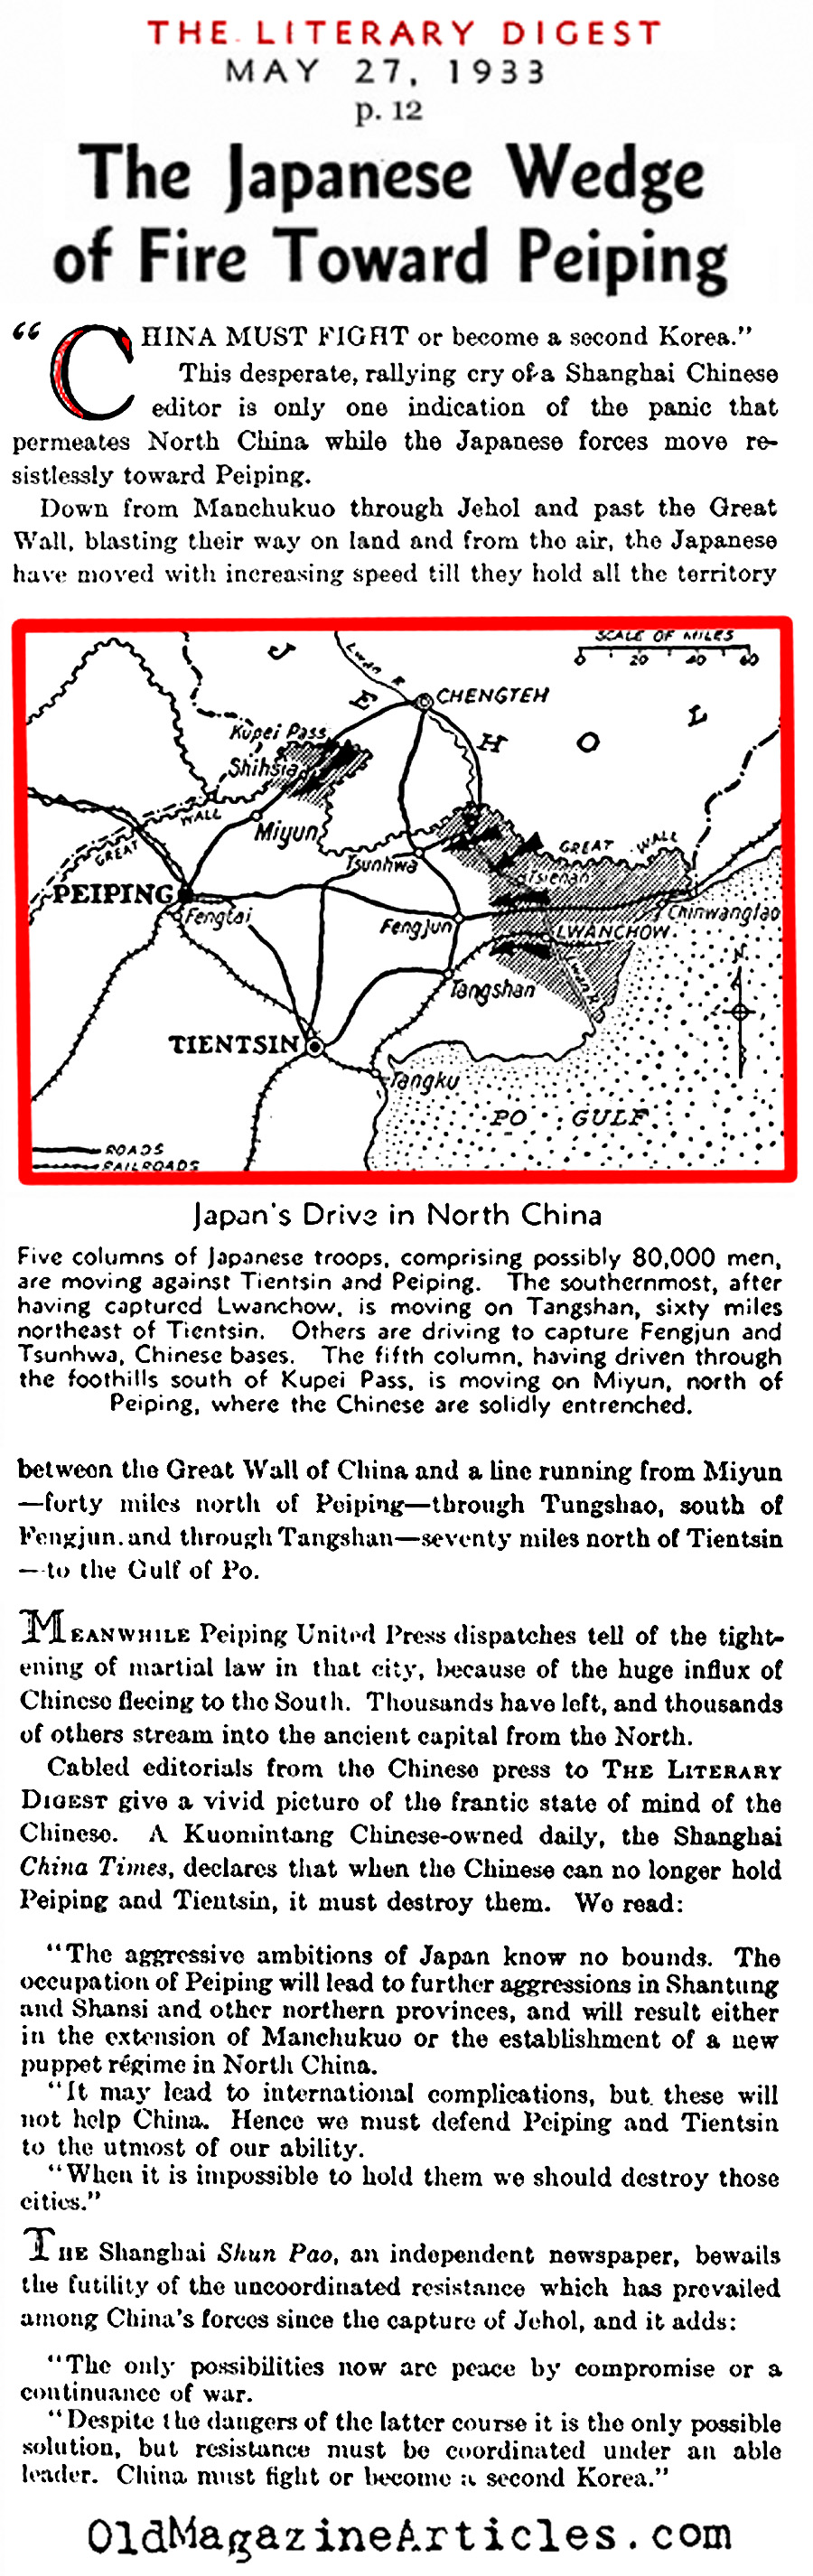 The Japanese Drive on Beijing (The Literary Digest, 1933)